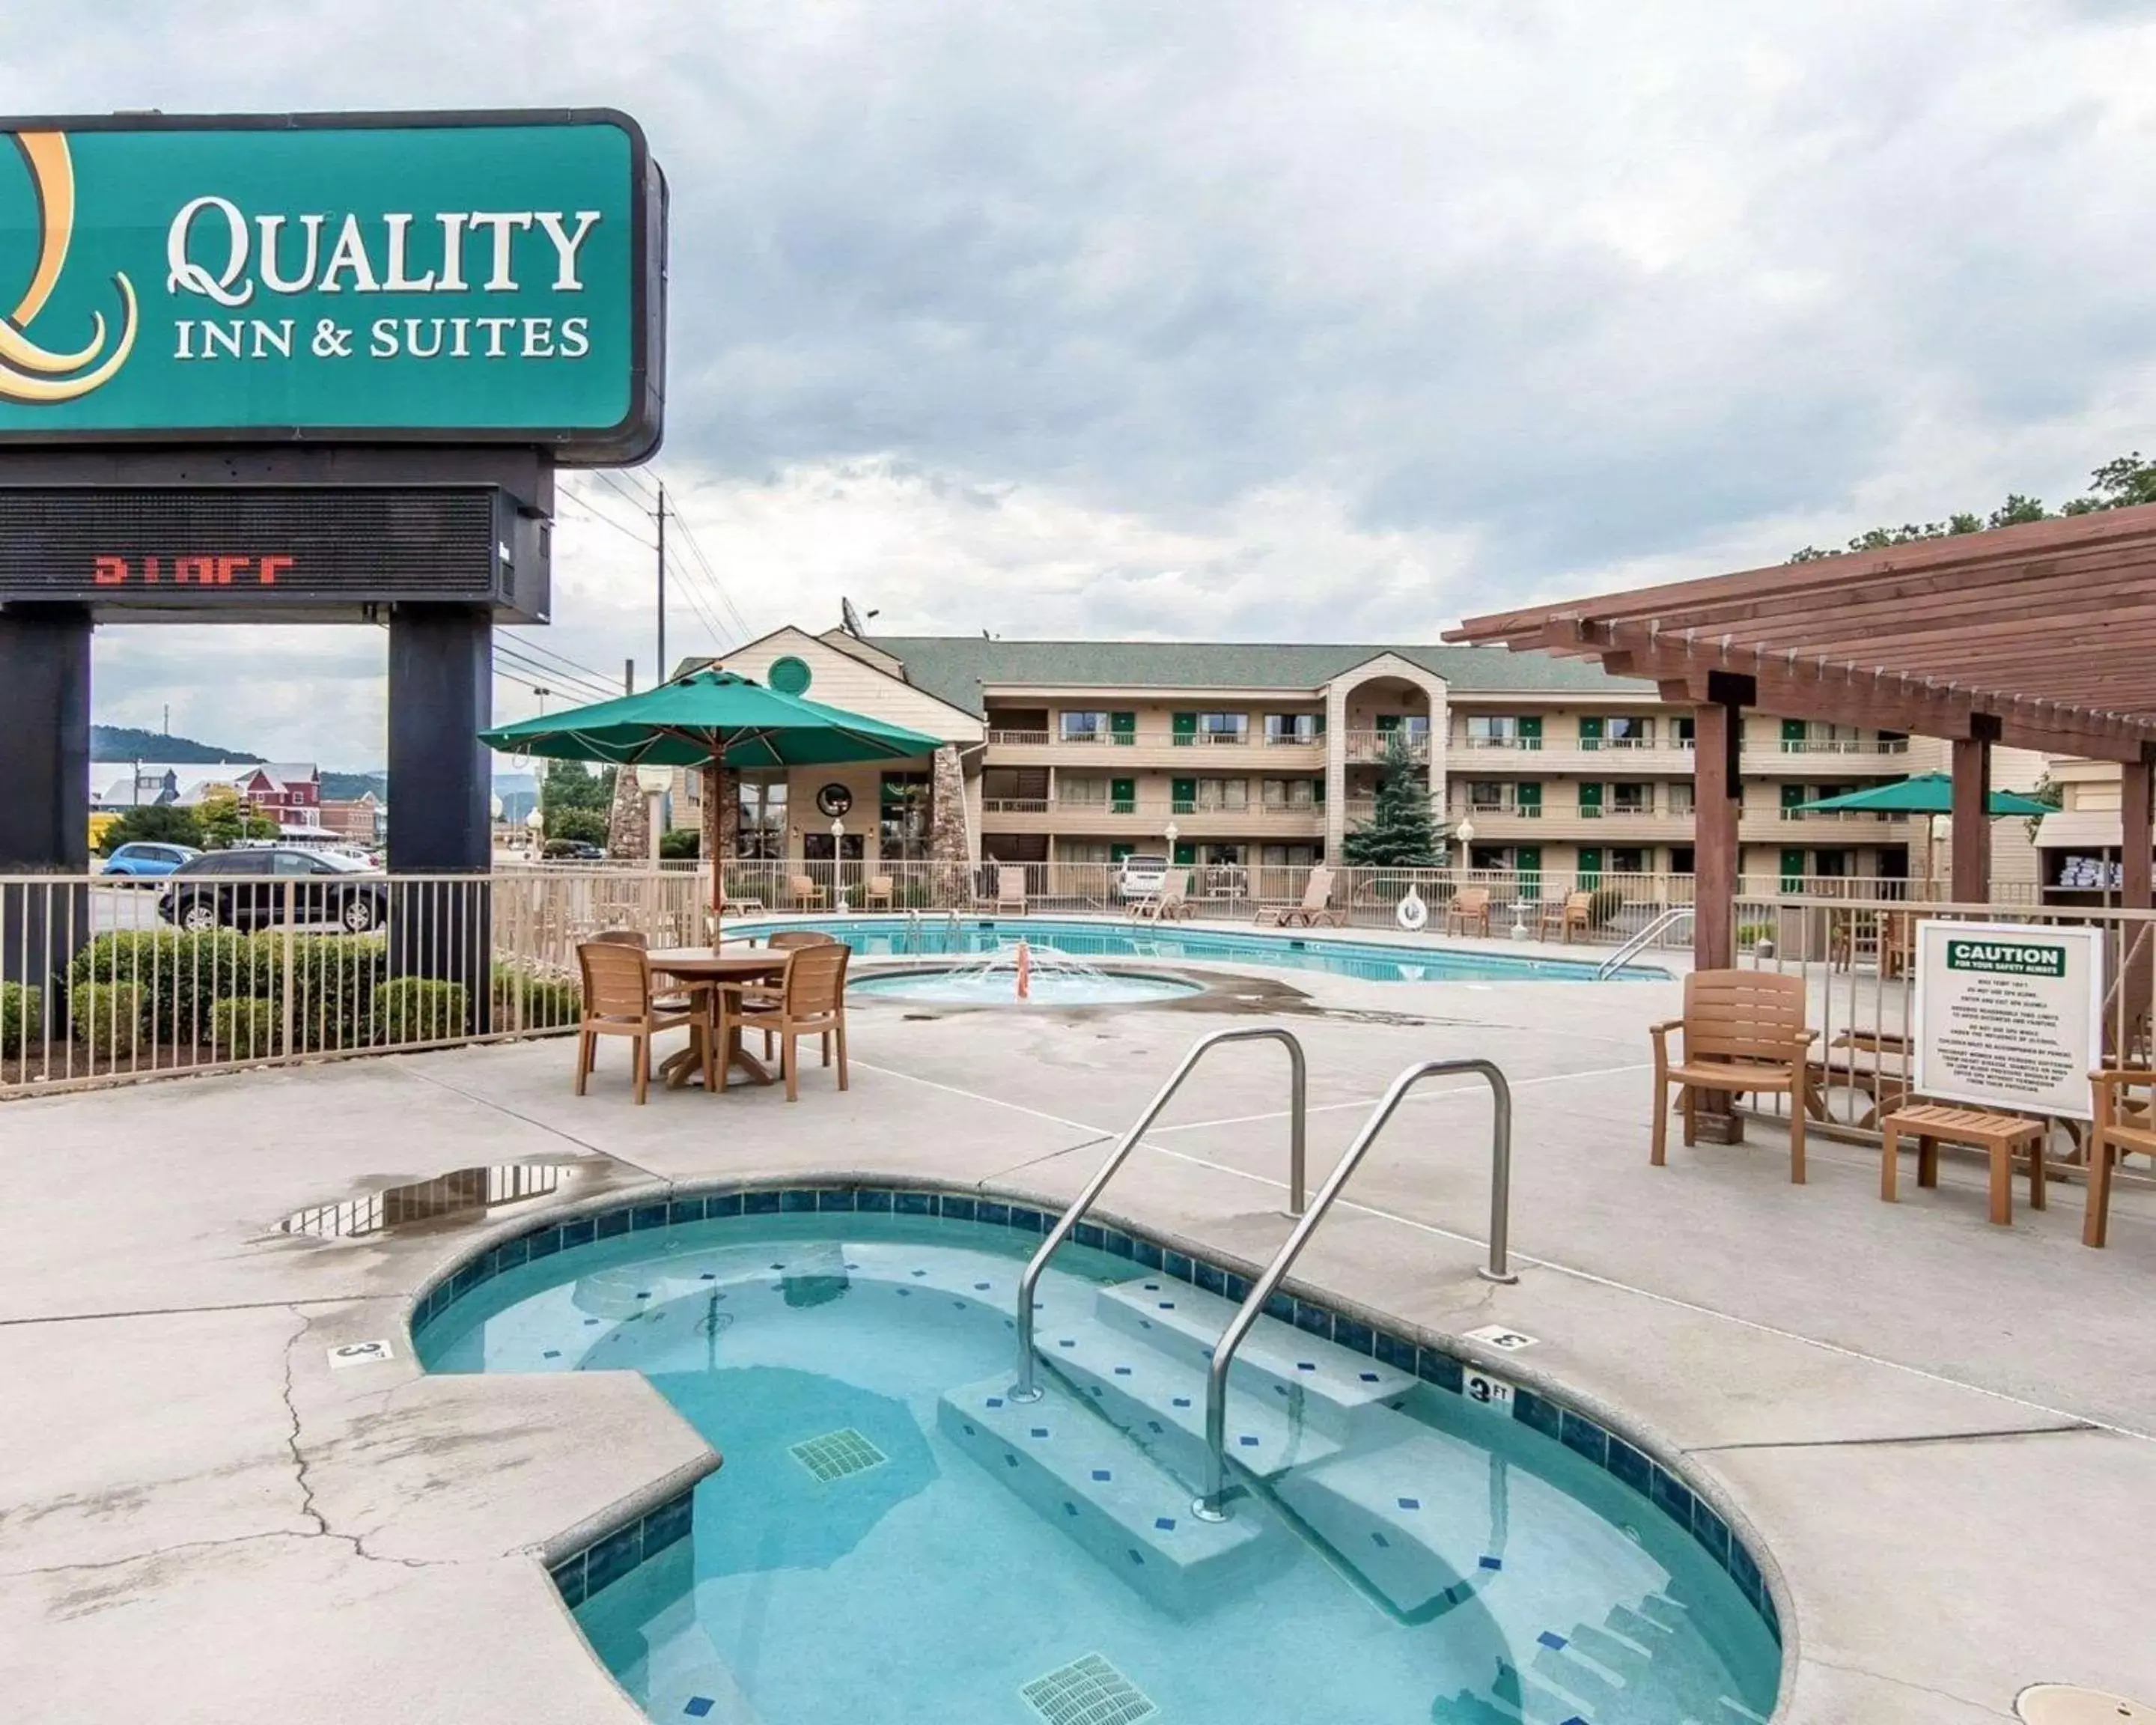 On site, Swimming Pool in Quality Inn & Suites at Dollywood Lane